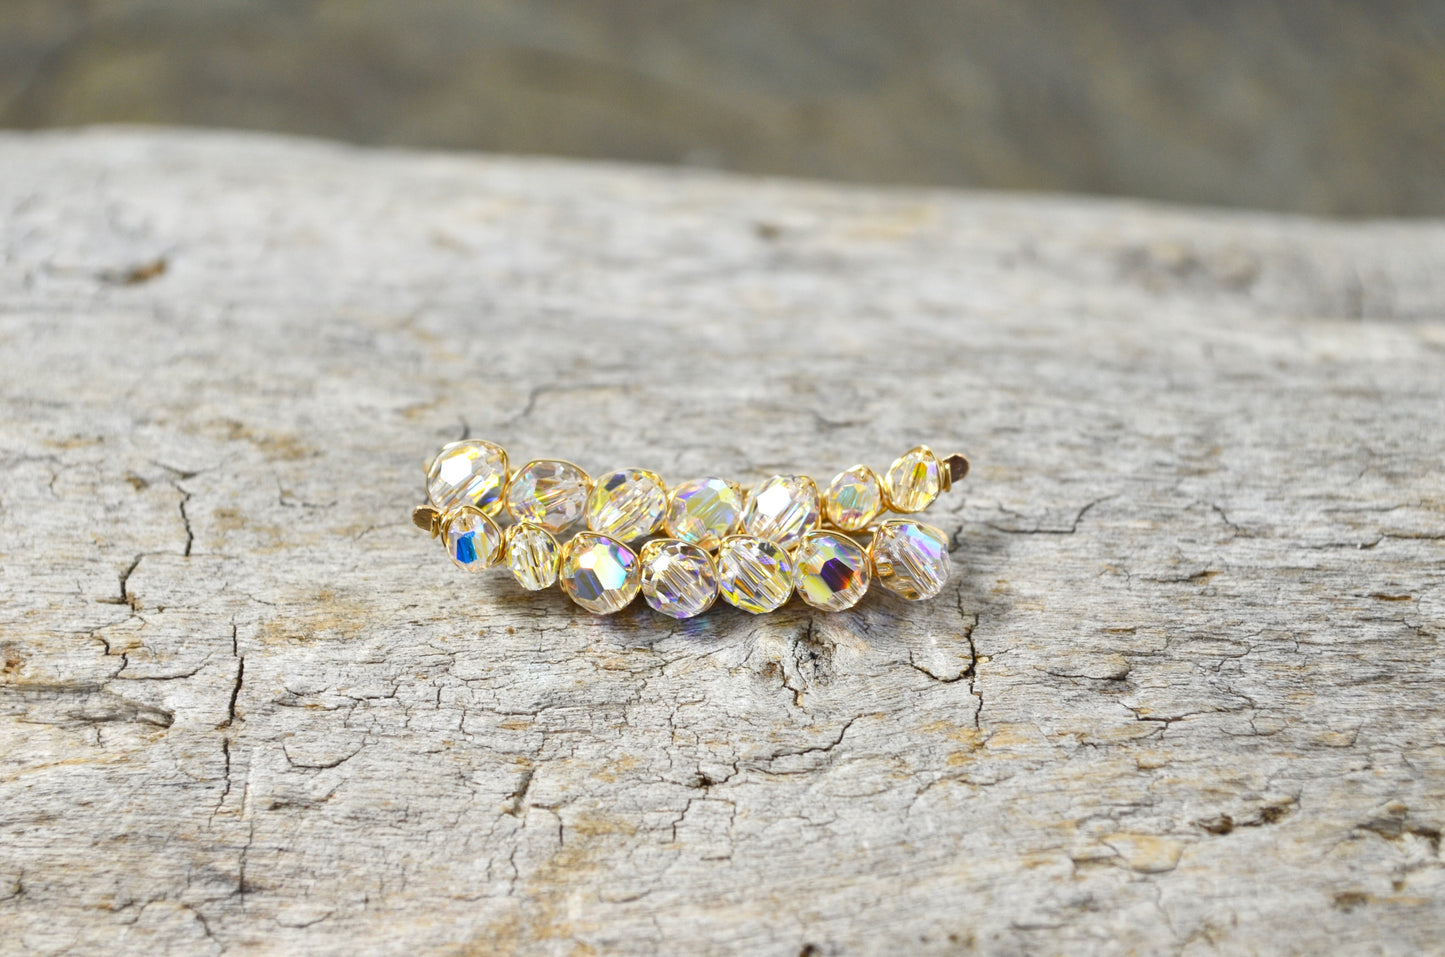 Rainbow Clear Crystal Ear Climbers in Sterling Silver or 14k Gold Fill, Crystal prism ear crawler earrings